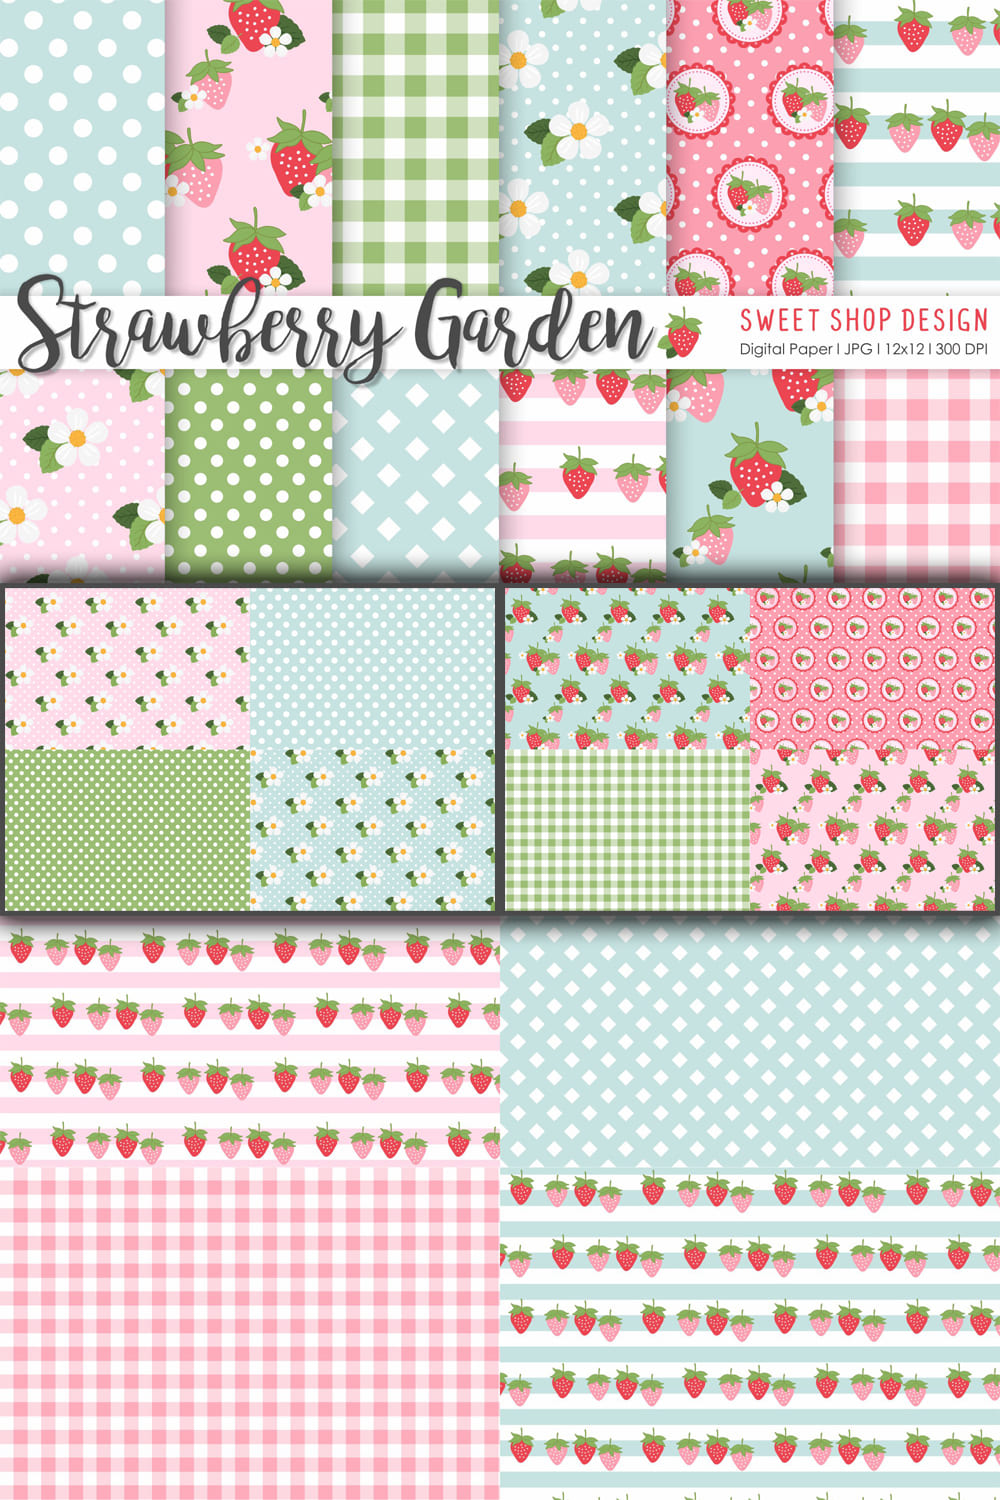 Patterns with geometric patterns and strawberry design.